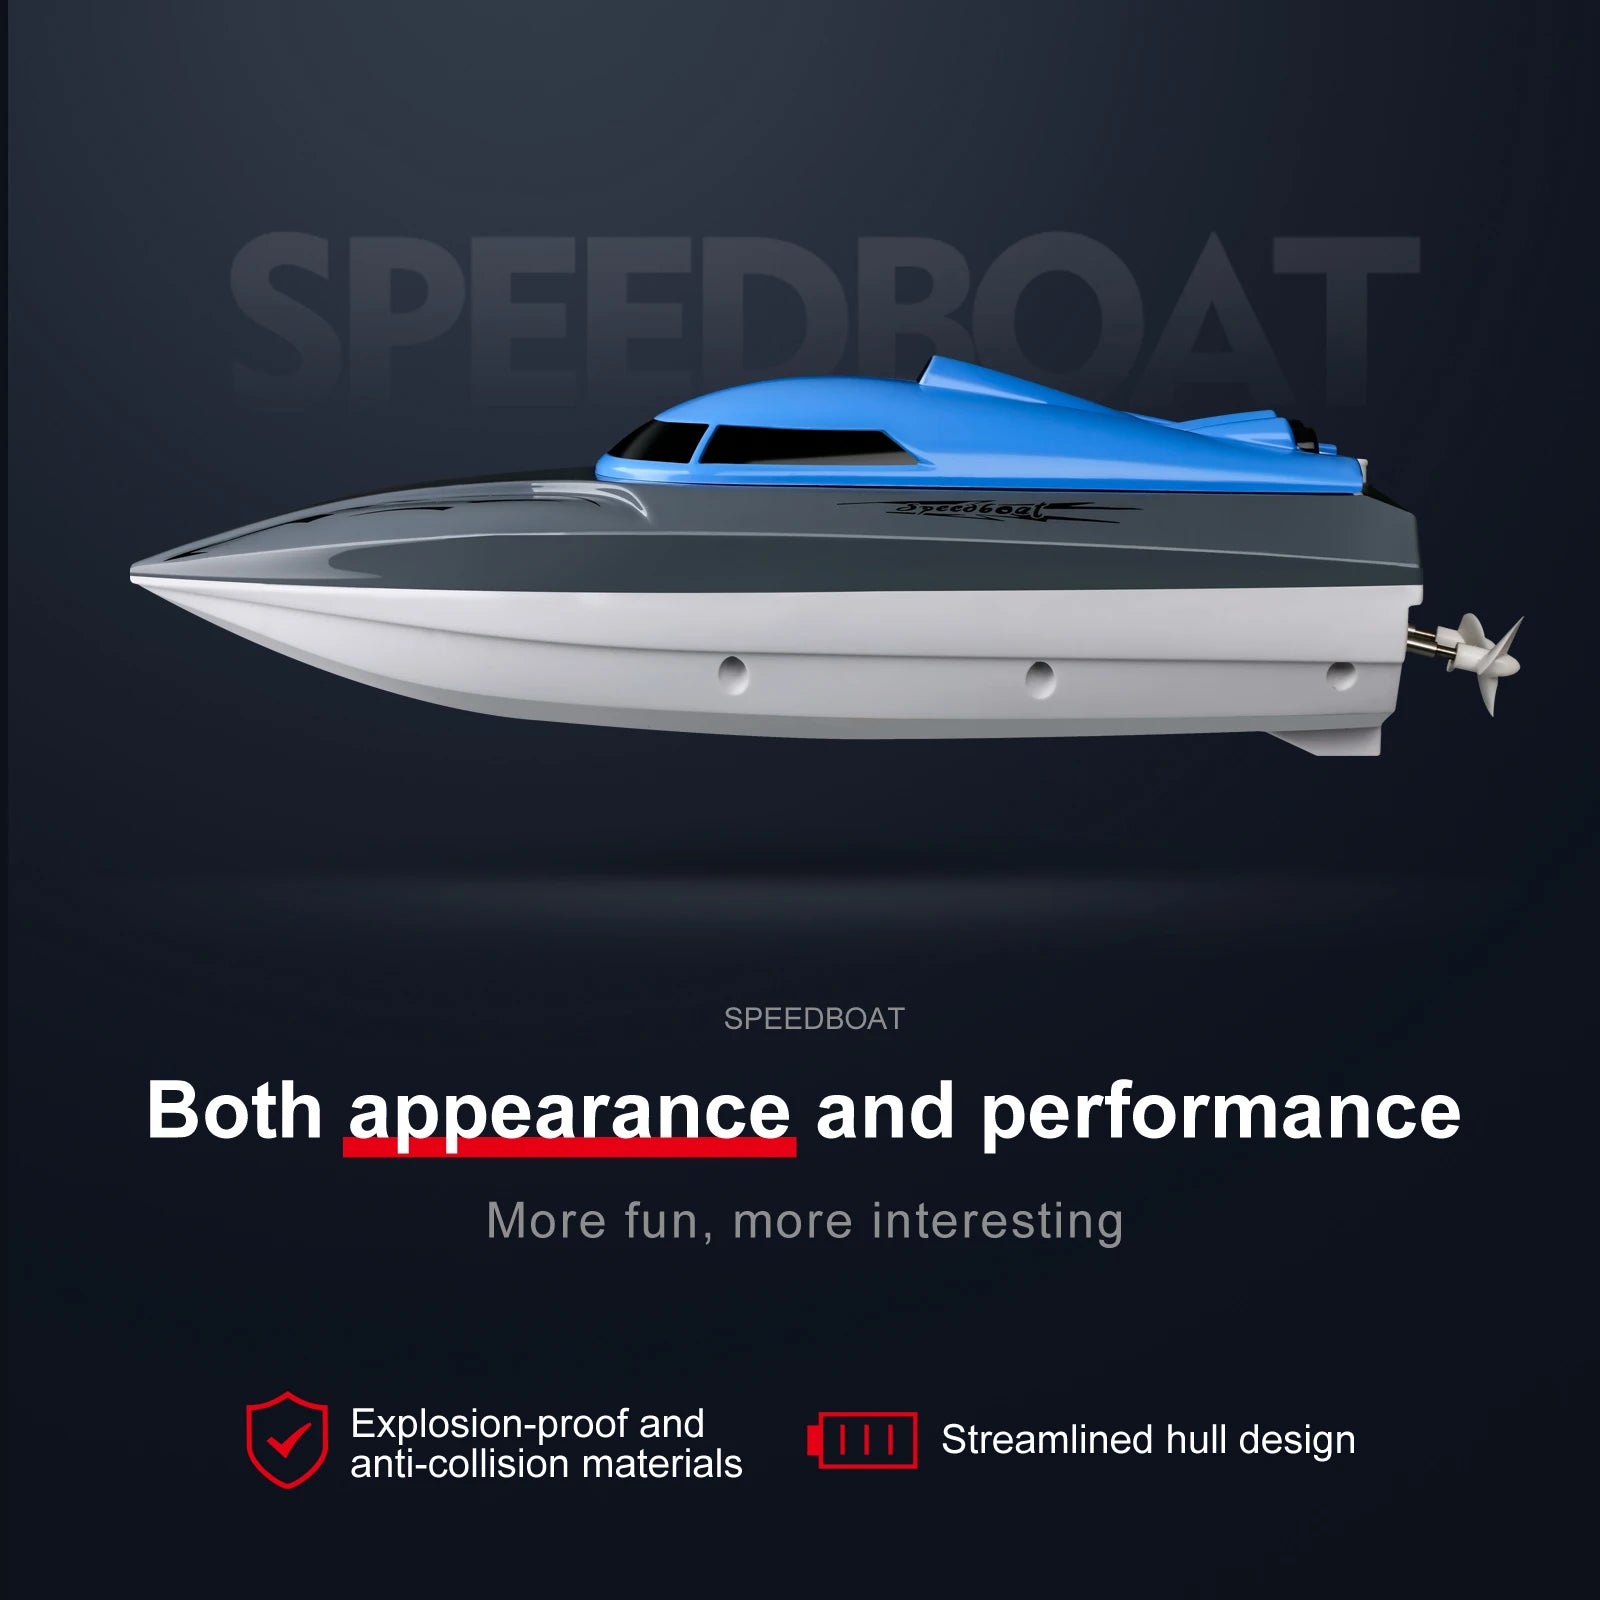 Rc Boat, GDFEDROAT 2239g2n6 SPEEDBOAT Both appearance and